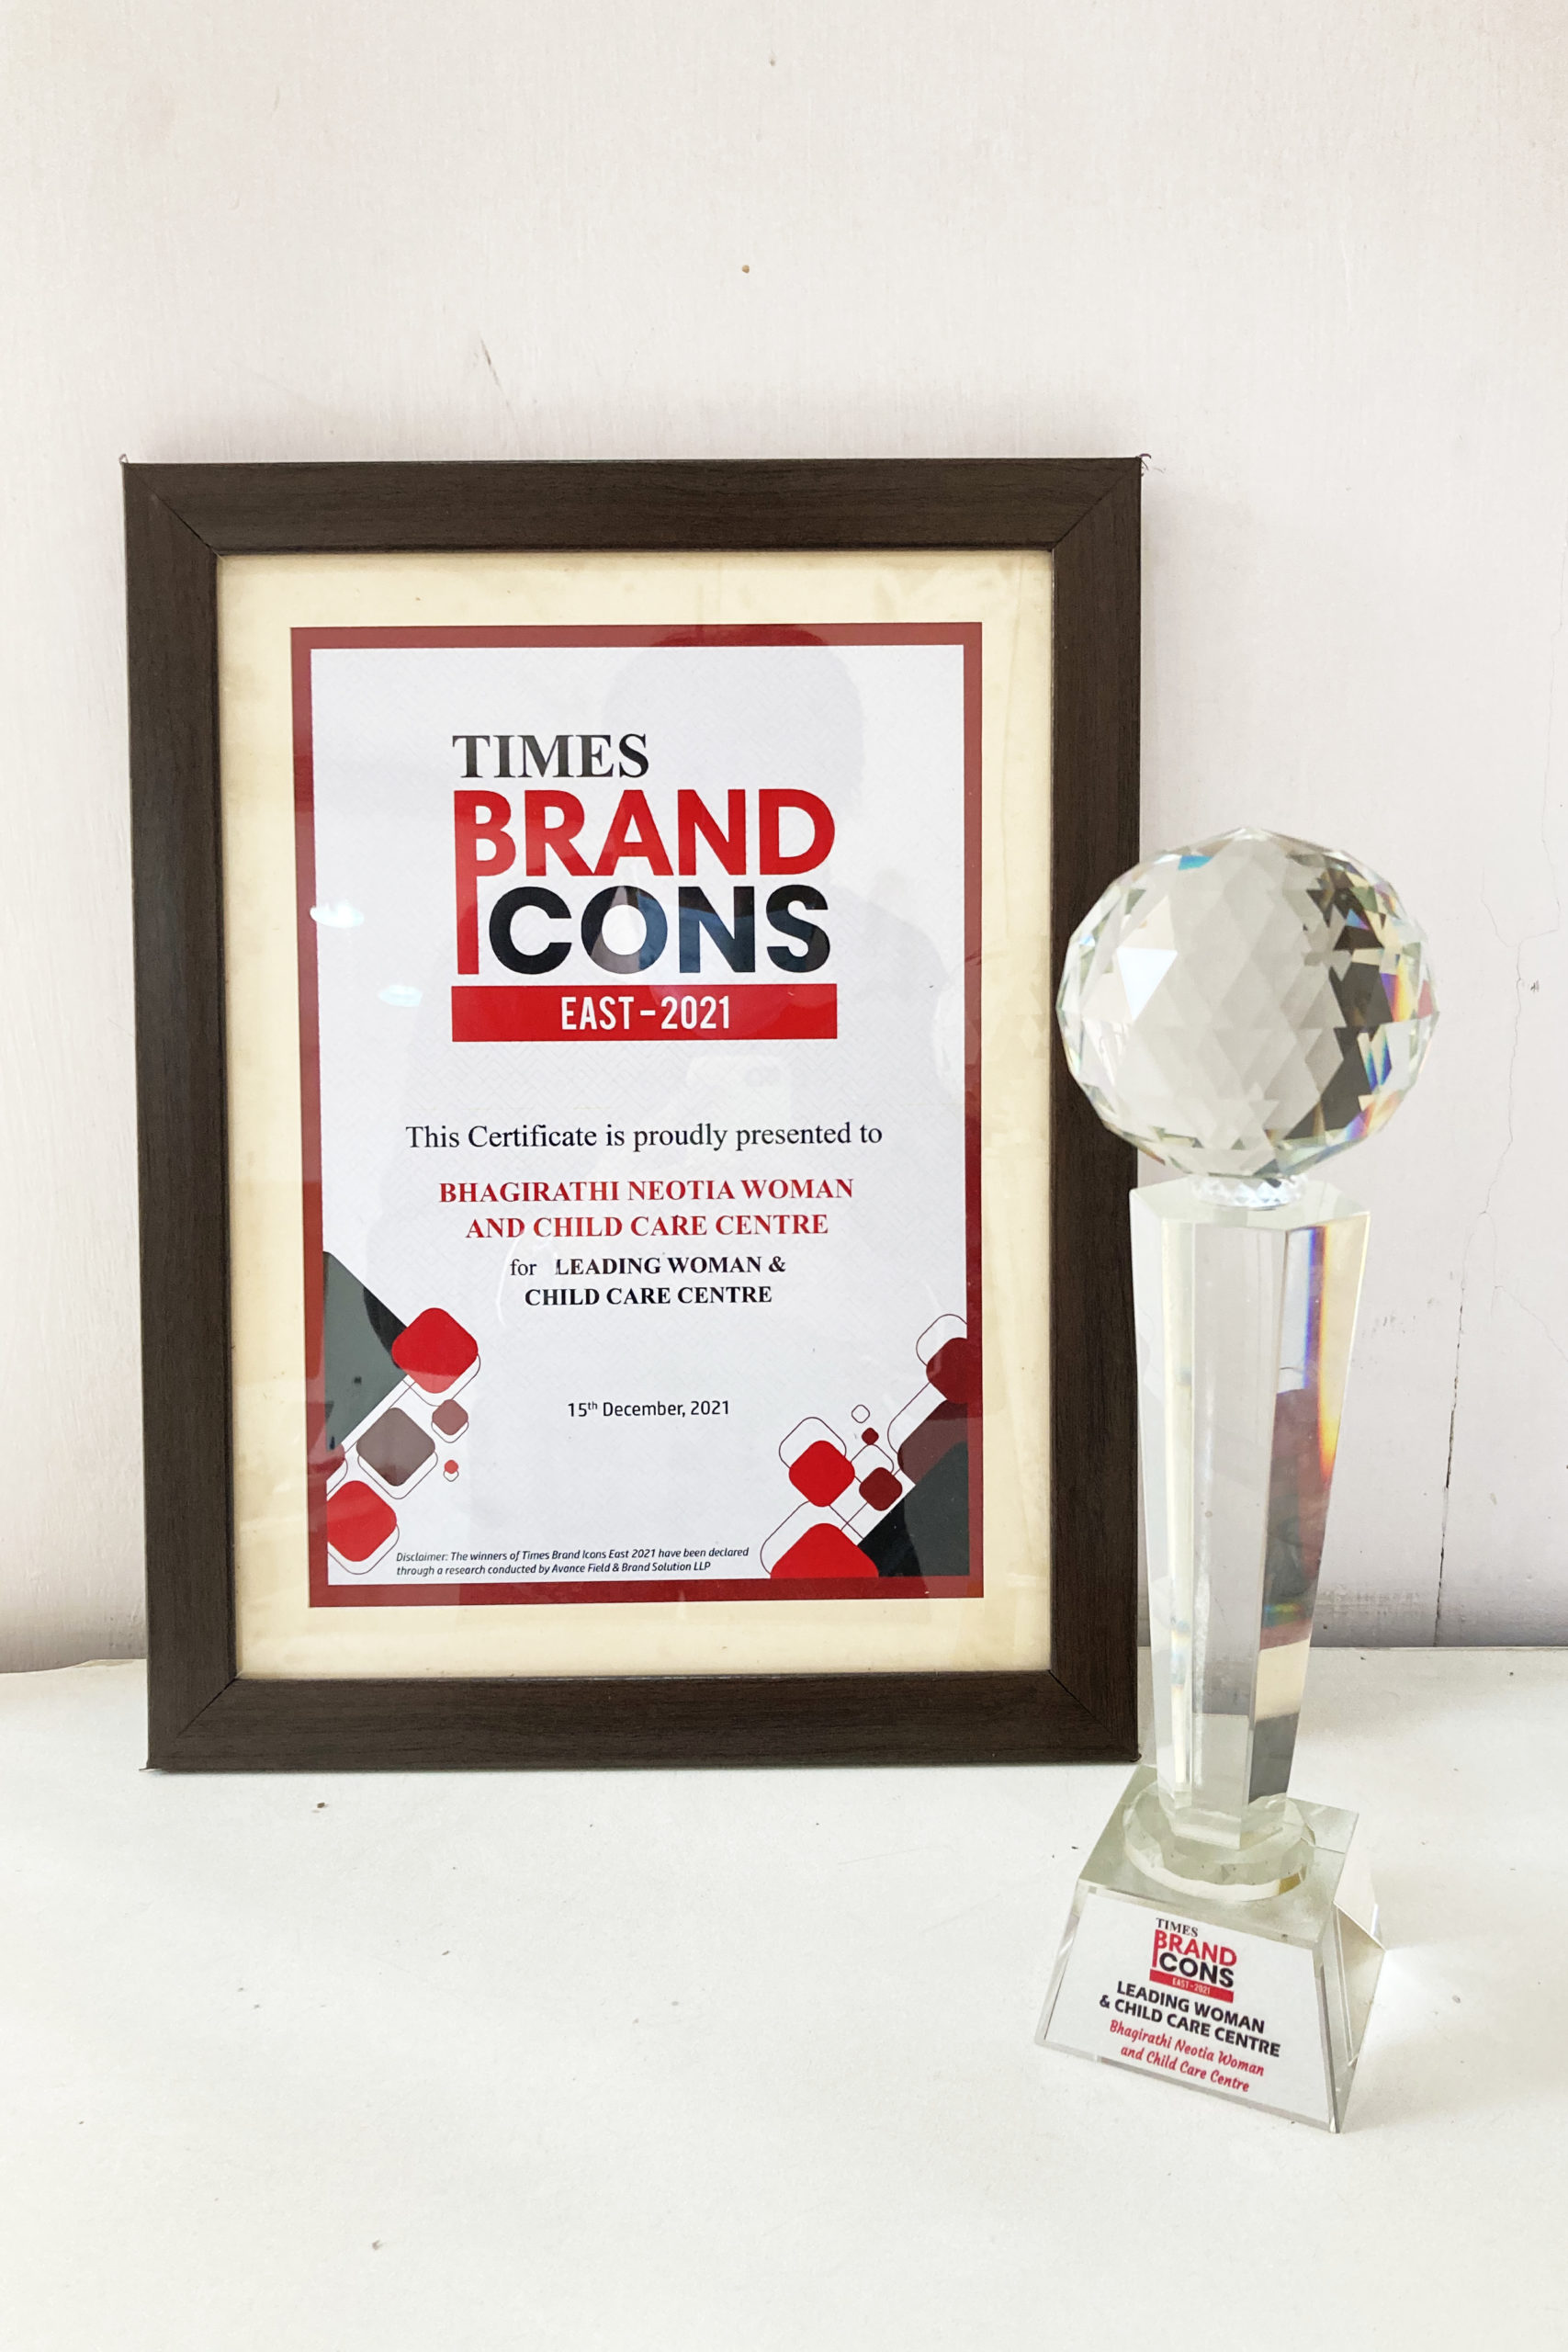 Times Brand Icons Award 2021 for Bhagirathi Neotia Woman & Child Care Centre for Leading Woman & Child Care Centre